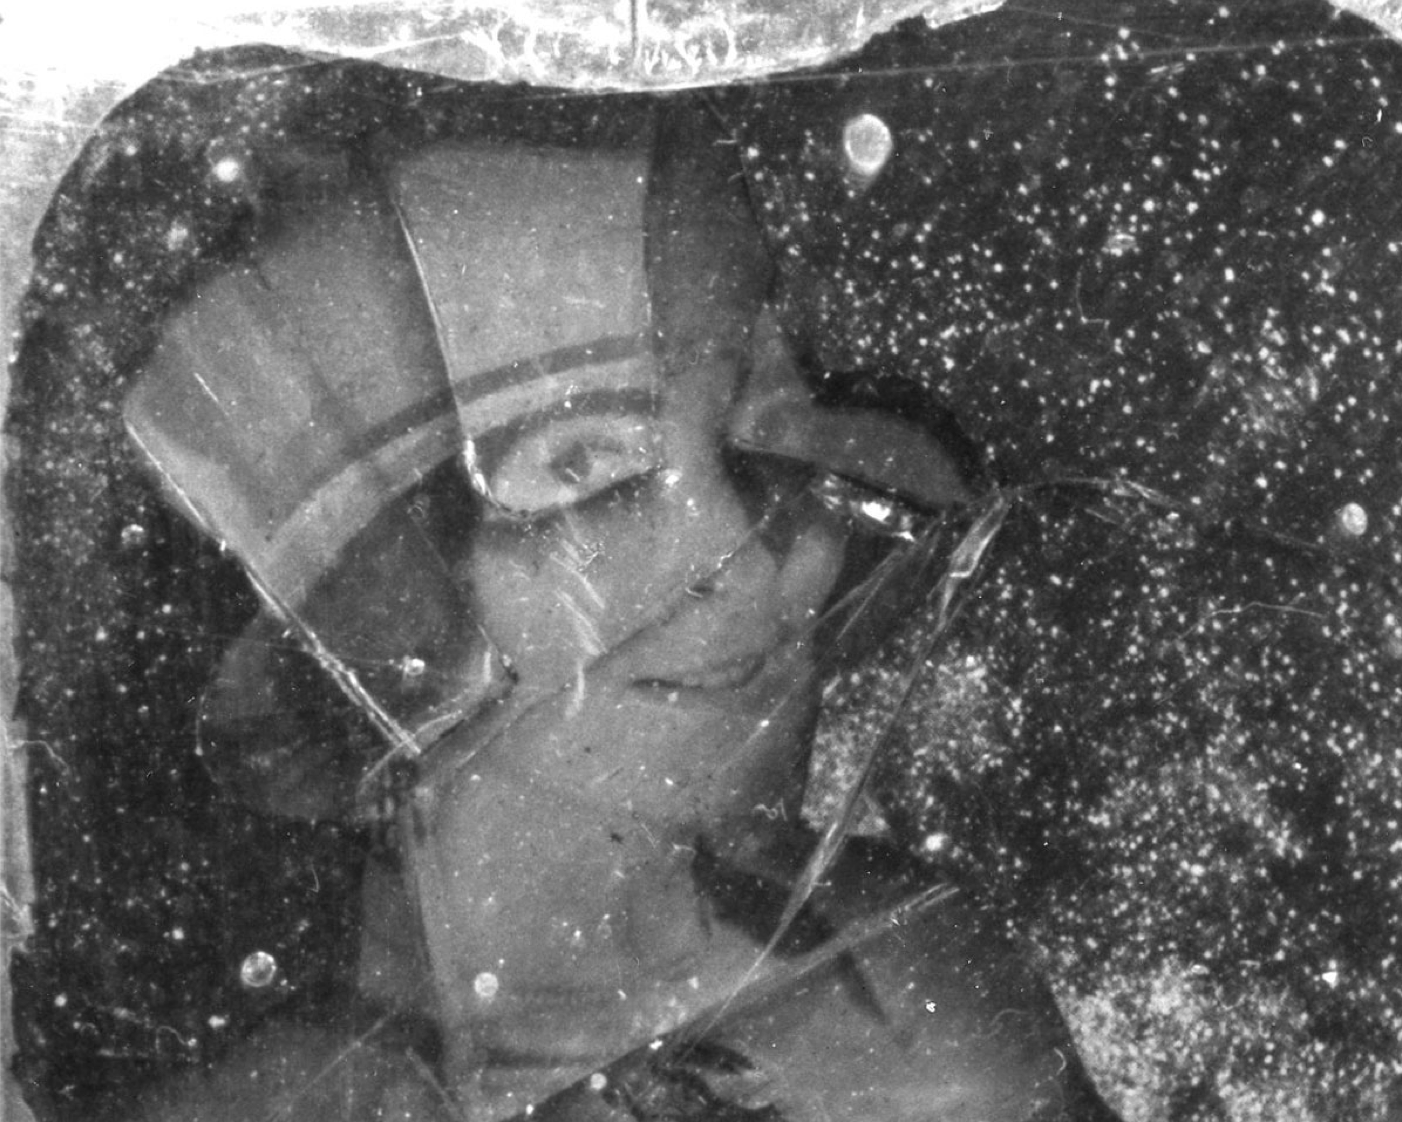 Black and white photo of Loy's face under cracked glass that highlights her right eye.